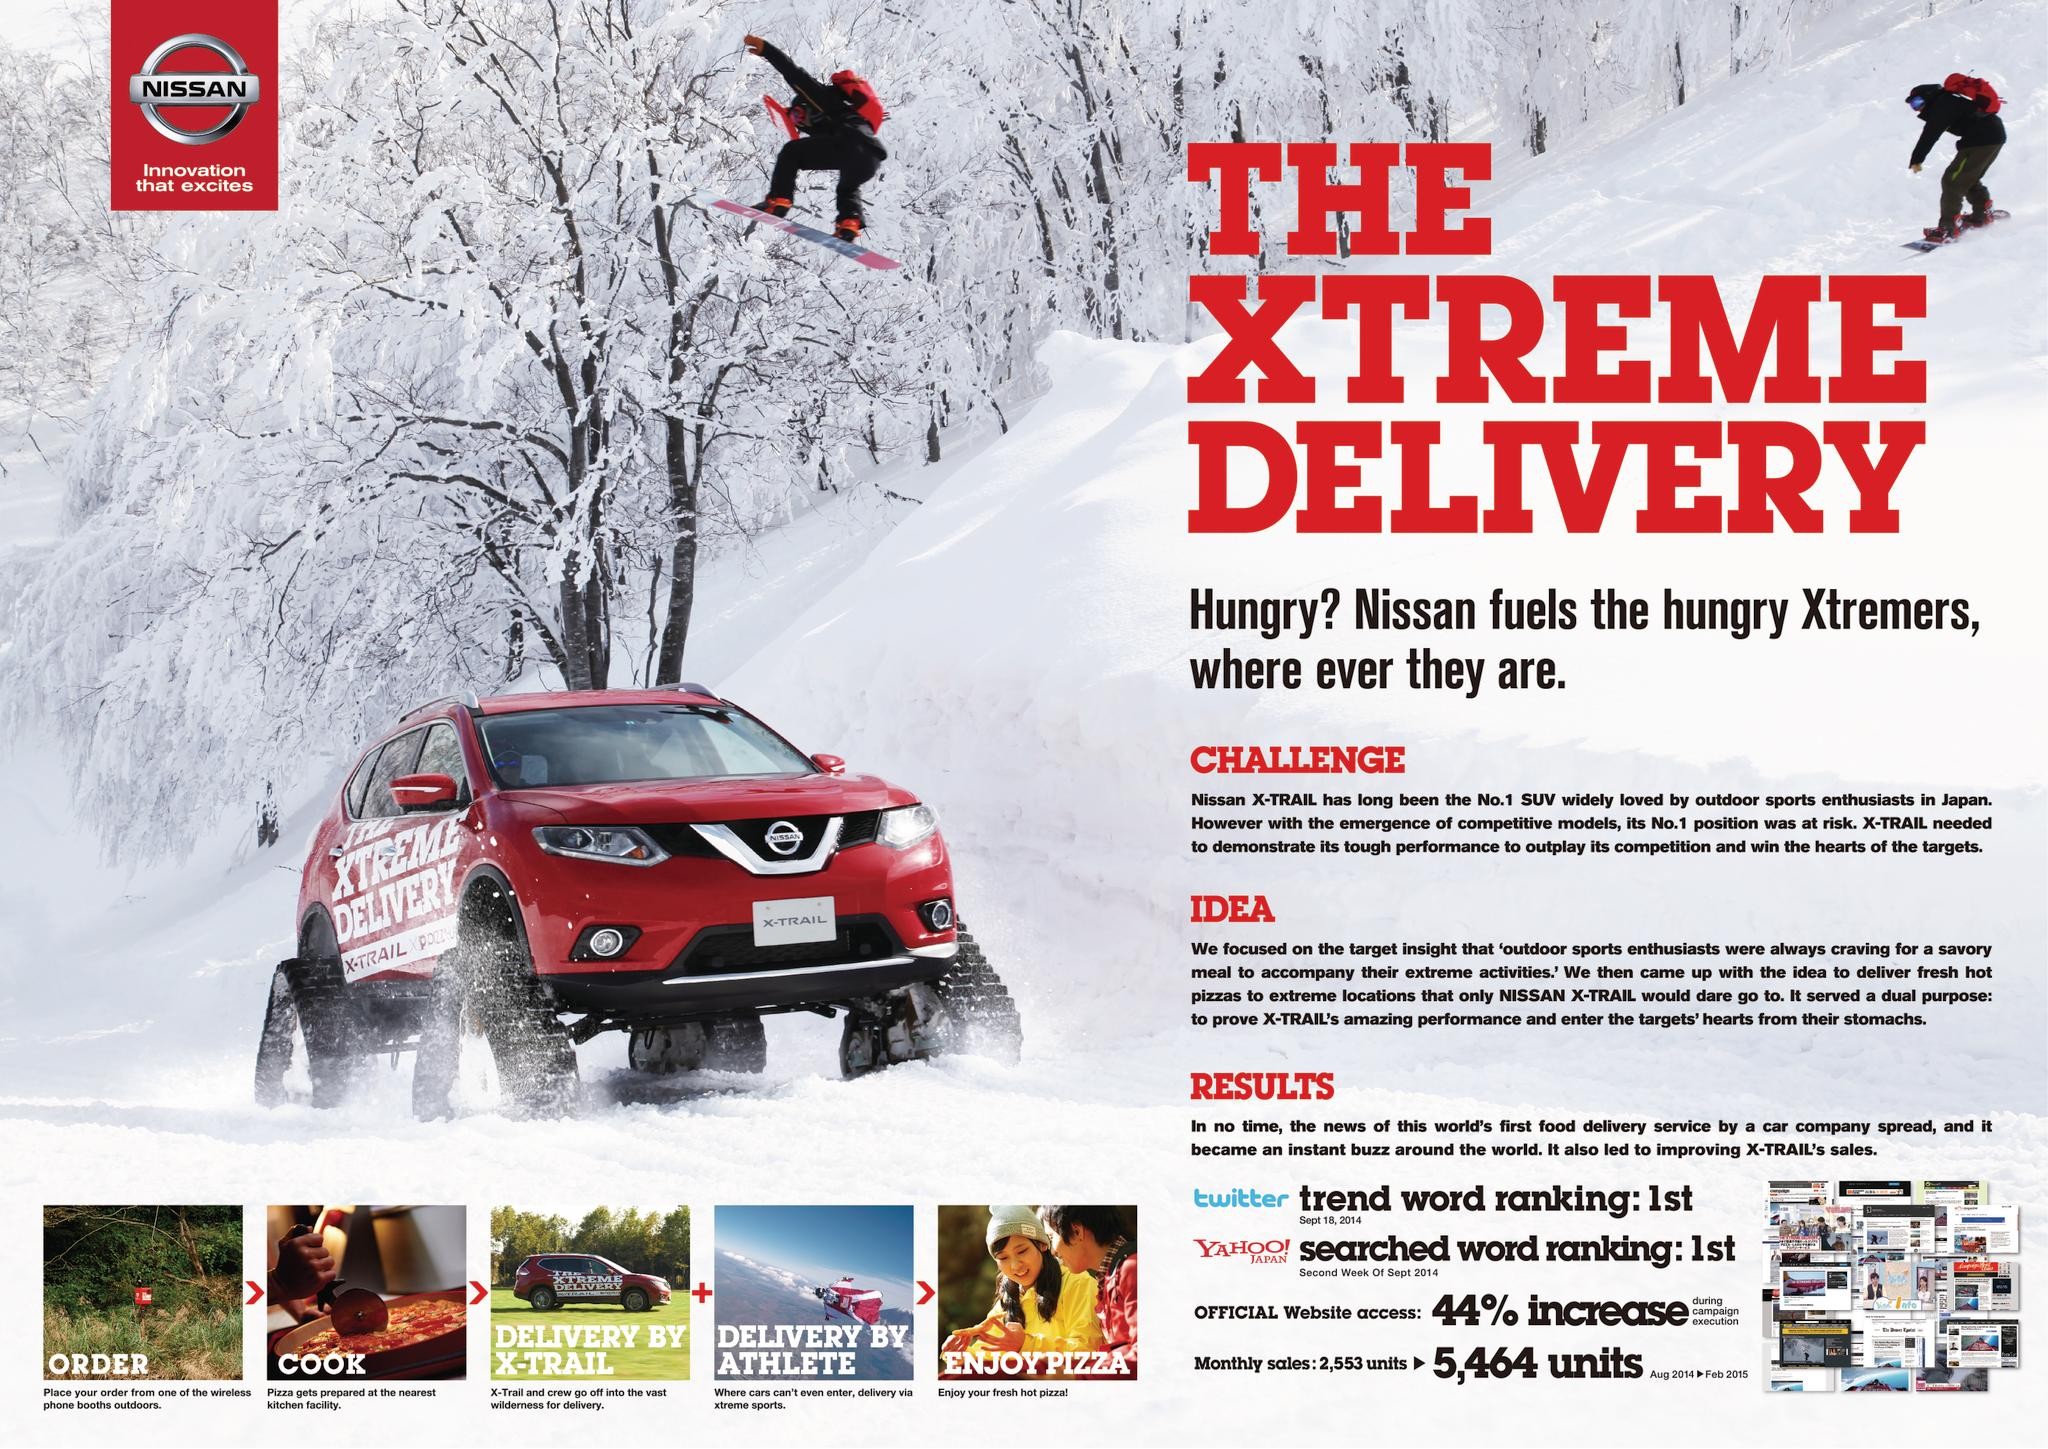 THE XTREME DELIVERY